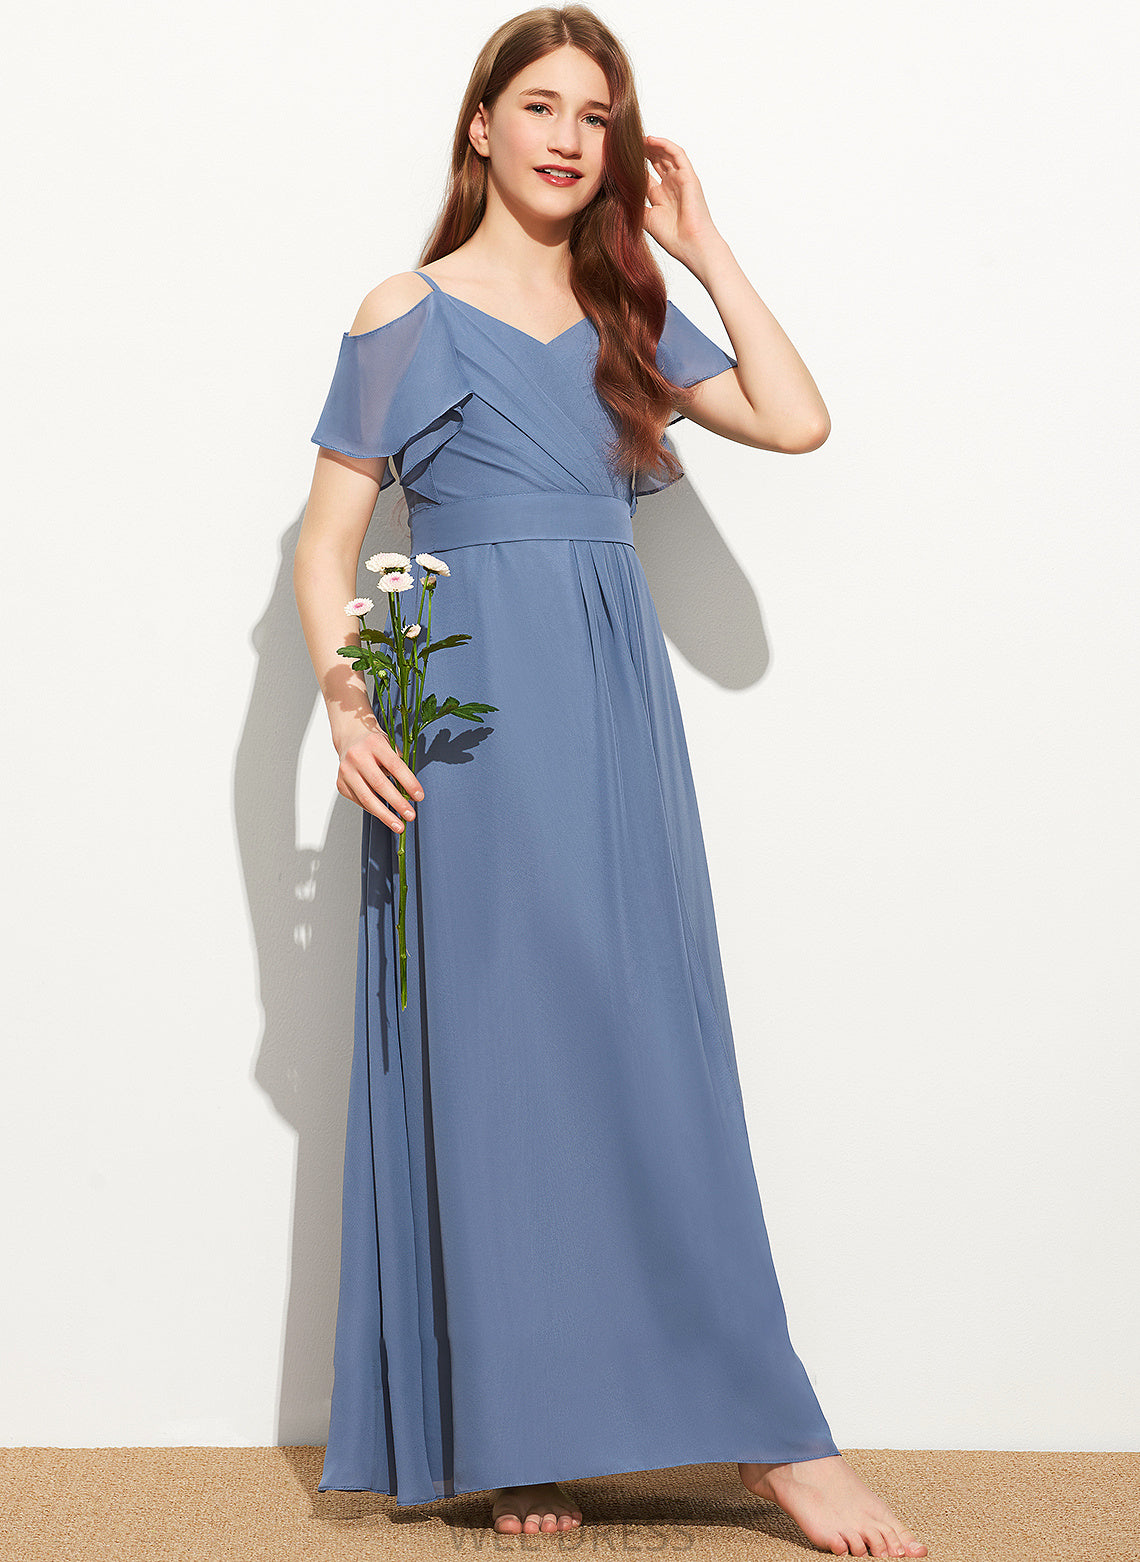 With Bow(s) Floor-Length Chiffon Ruffle Jade Off-the-Shoulder Junior Bridesmaid Dresses A-Line